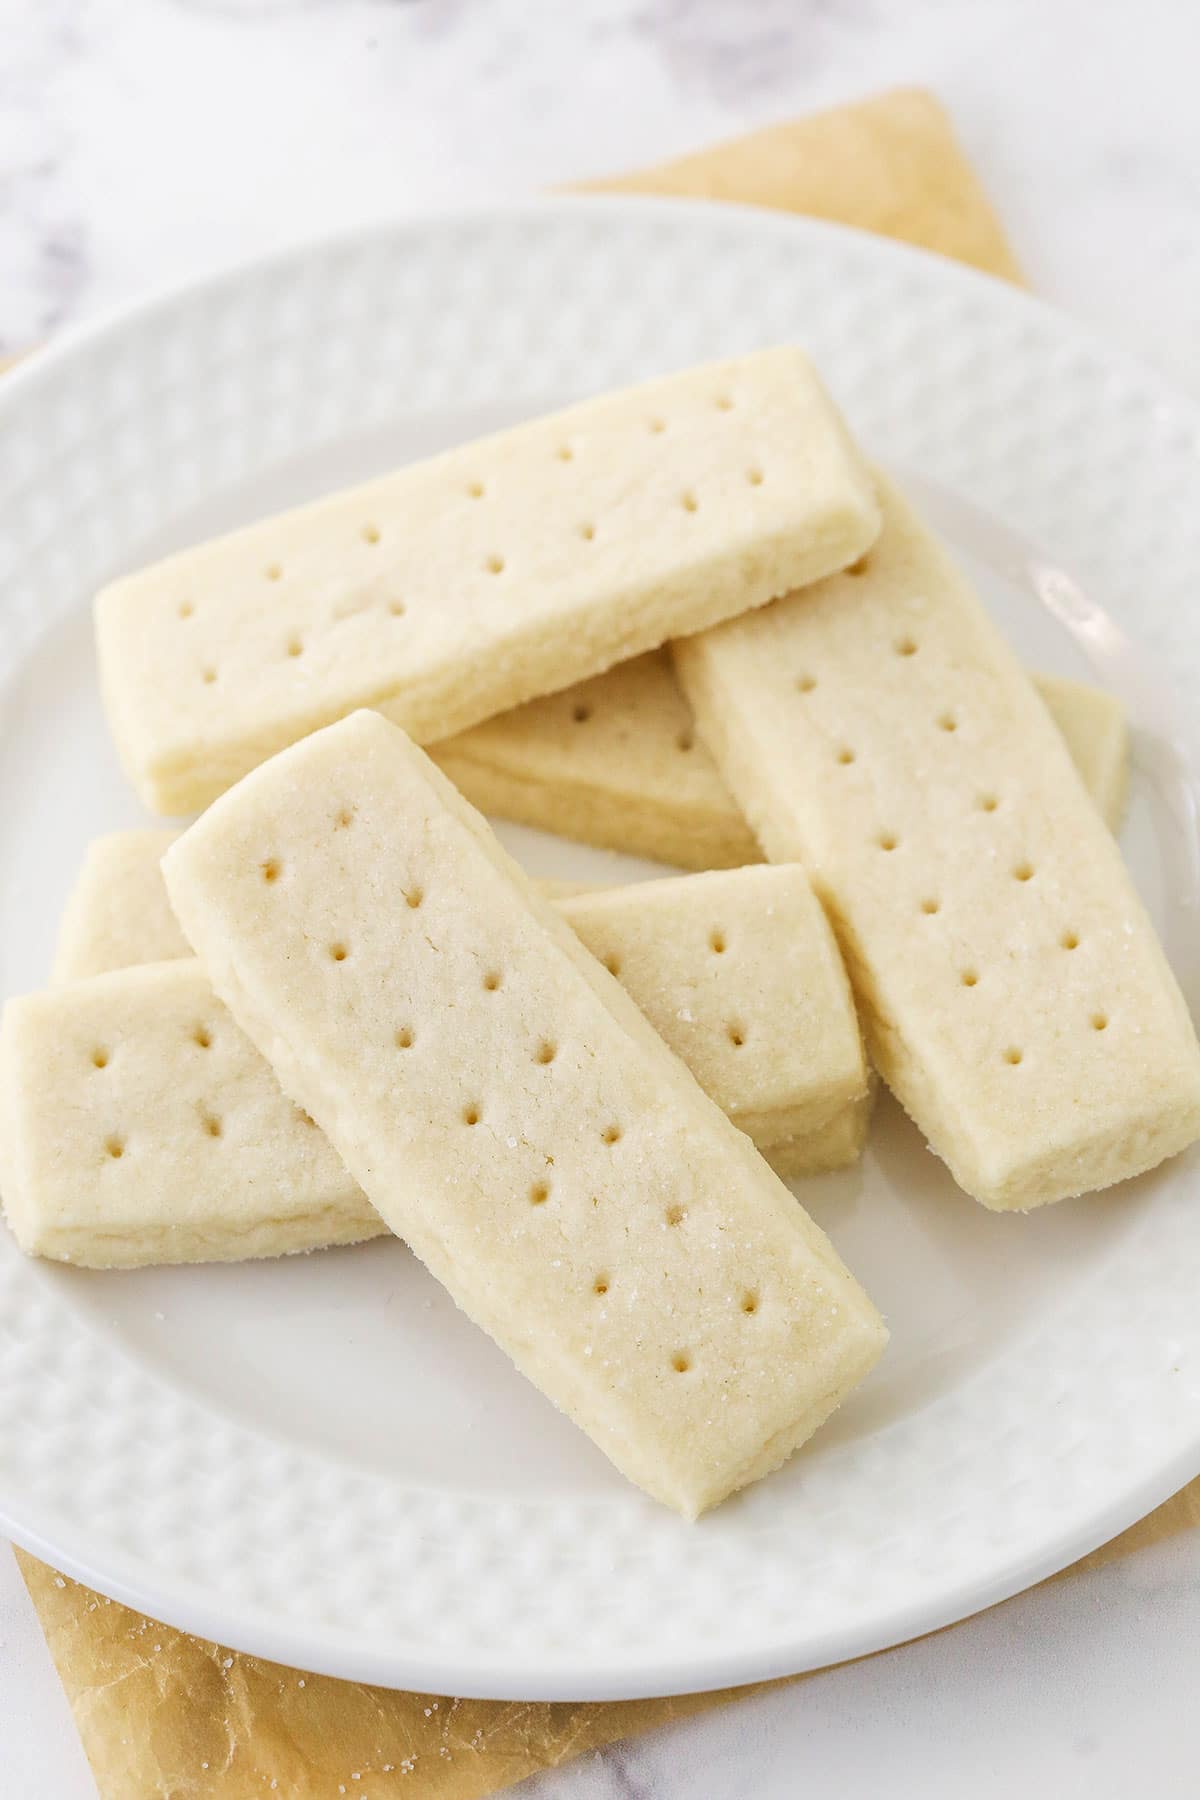 A plate of six shortbread cookies on top of a white marble countertop